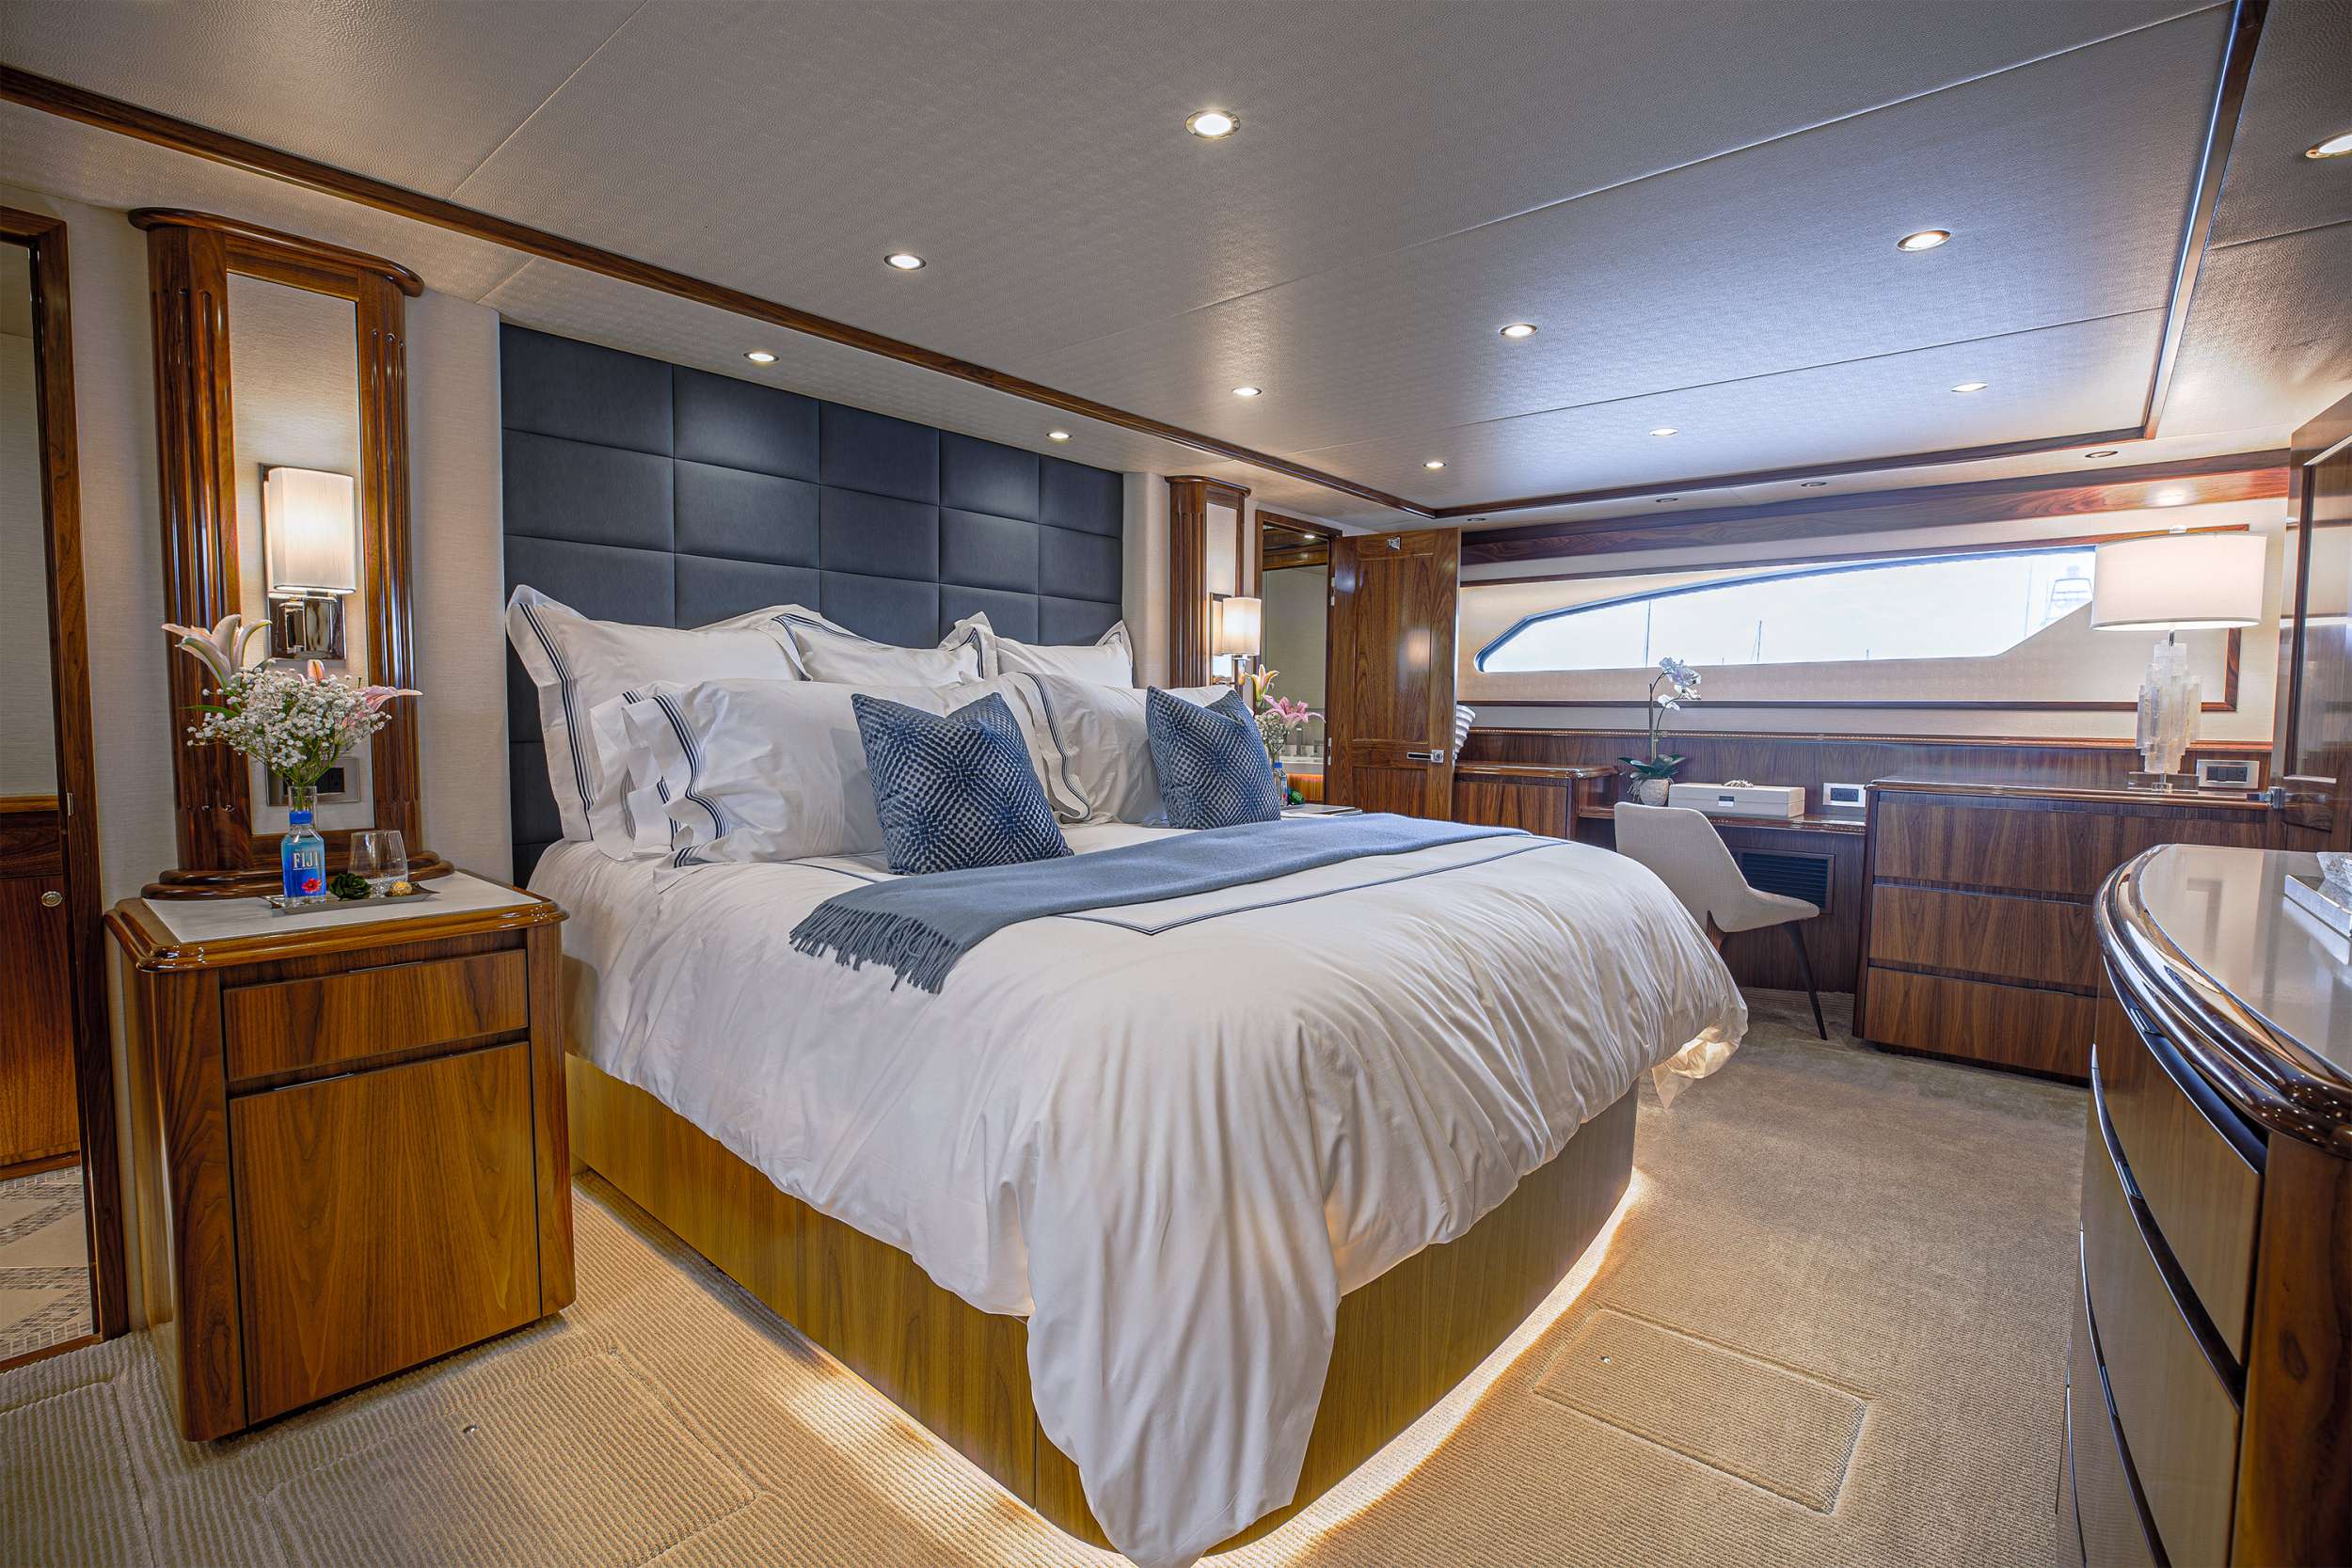 Motor Yacht 'SPECULATOR 92' Master King Stateroom, 6 PAX, 3 Crew, 92.00 Ft, 28.00 Meters, Built 2017, Viking, U.S.A, Refit Year 2020